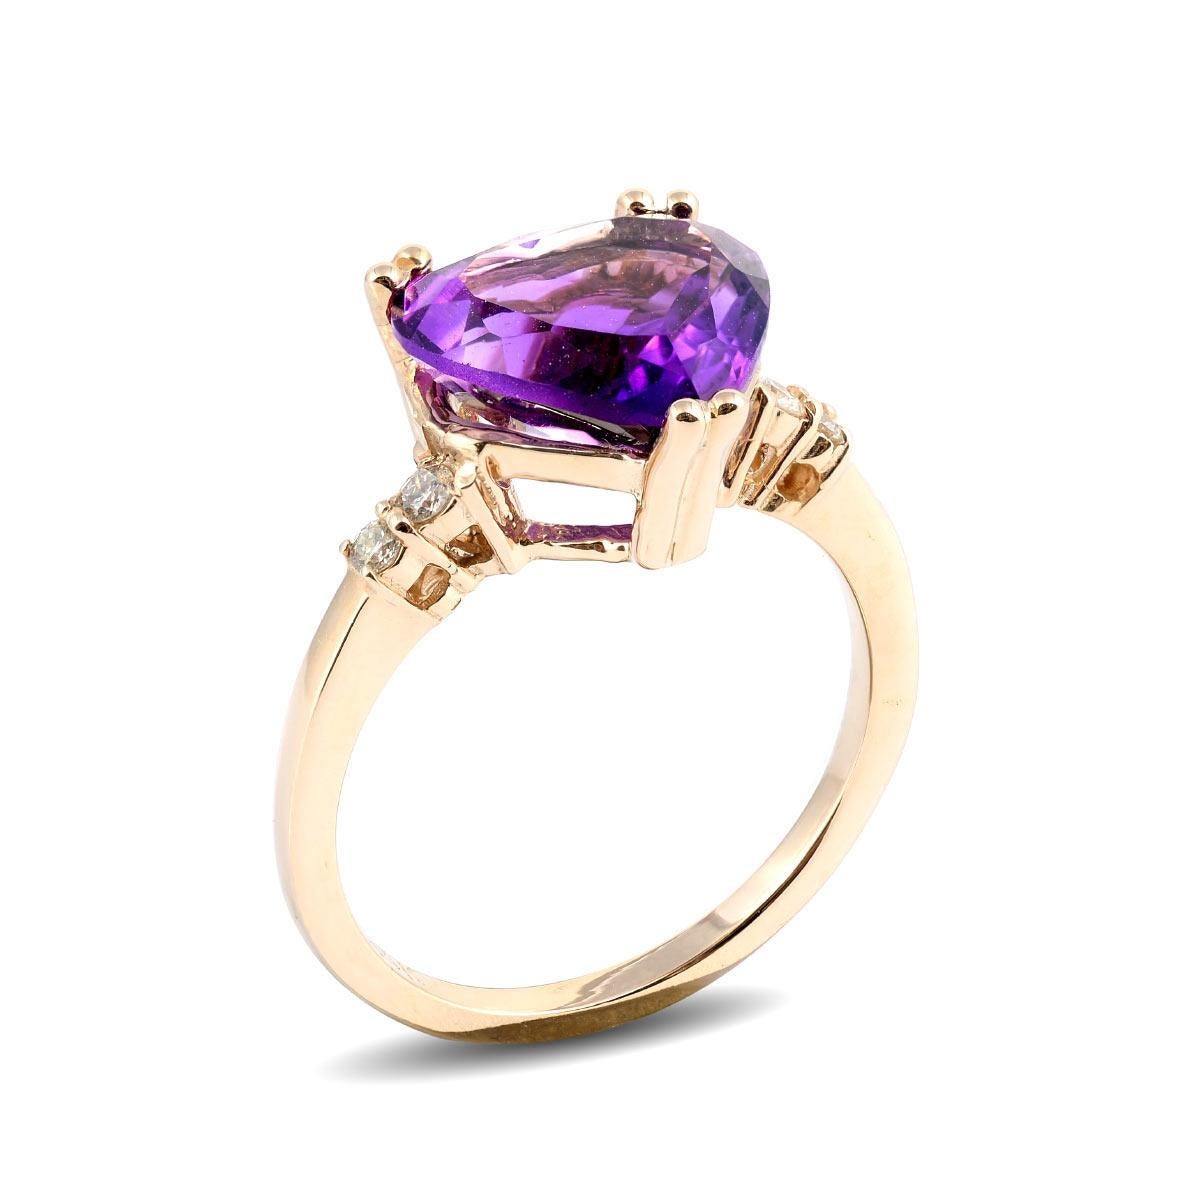 A color that has a glorious avatar, here is a 2.44 carat Amethyst that comes set with diamonds on either side adding a little sparkle. Allowing light to create the spectacle intended, this beautiful gemstone has unmatched brilliance. With royal